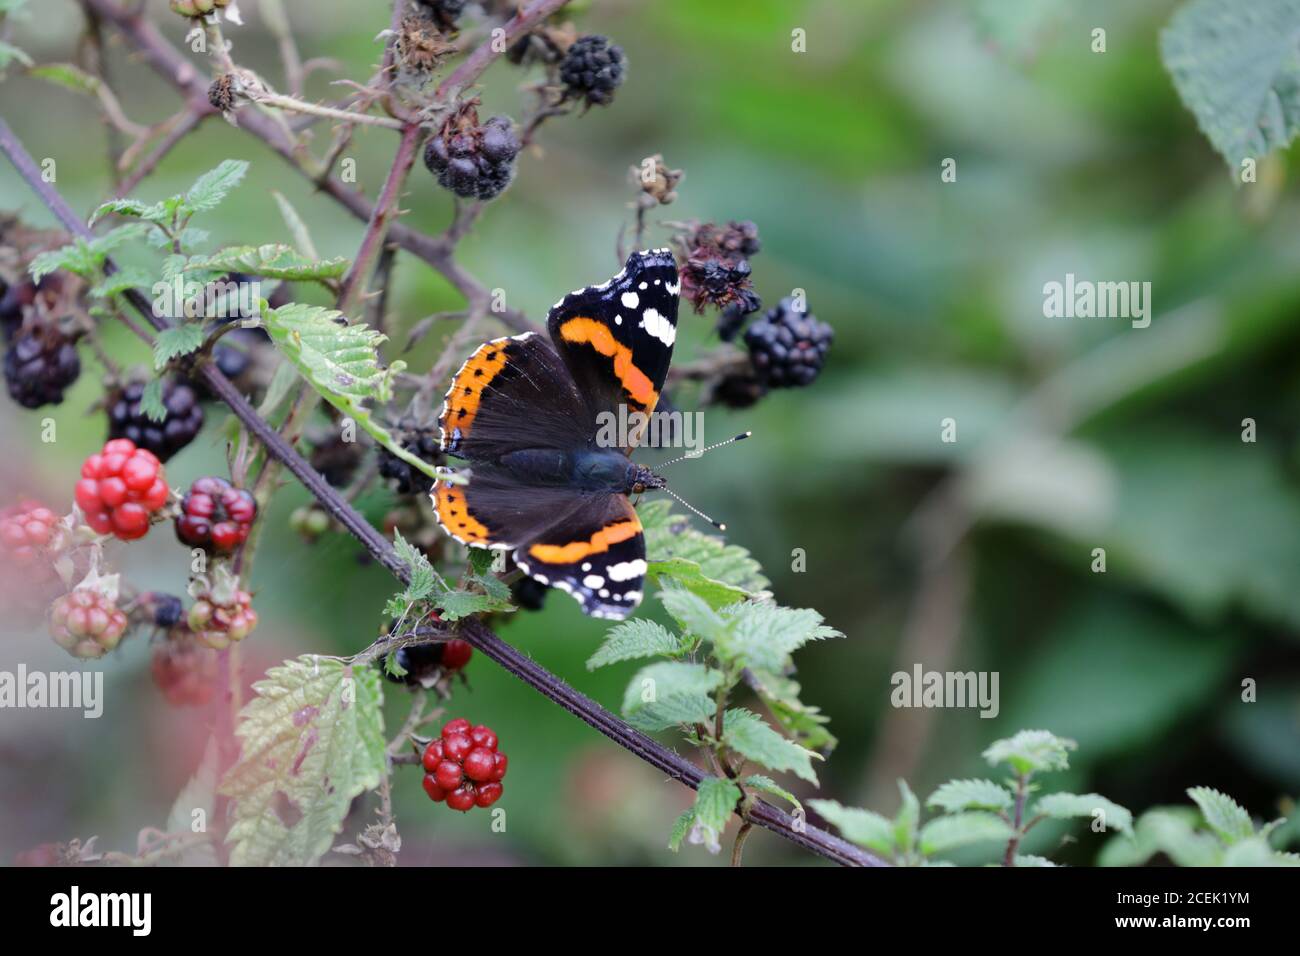 a red admiral (Vanessa atalanta) butterfly on a blackberry (Rubus fruticosus)  plant Stock Photo